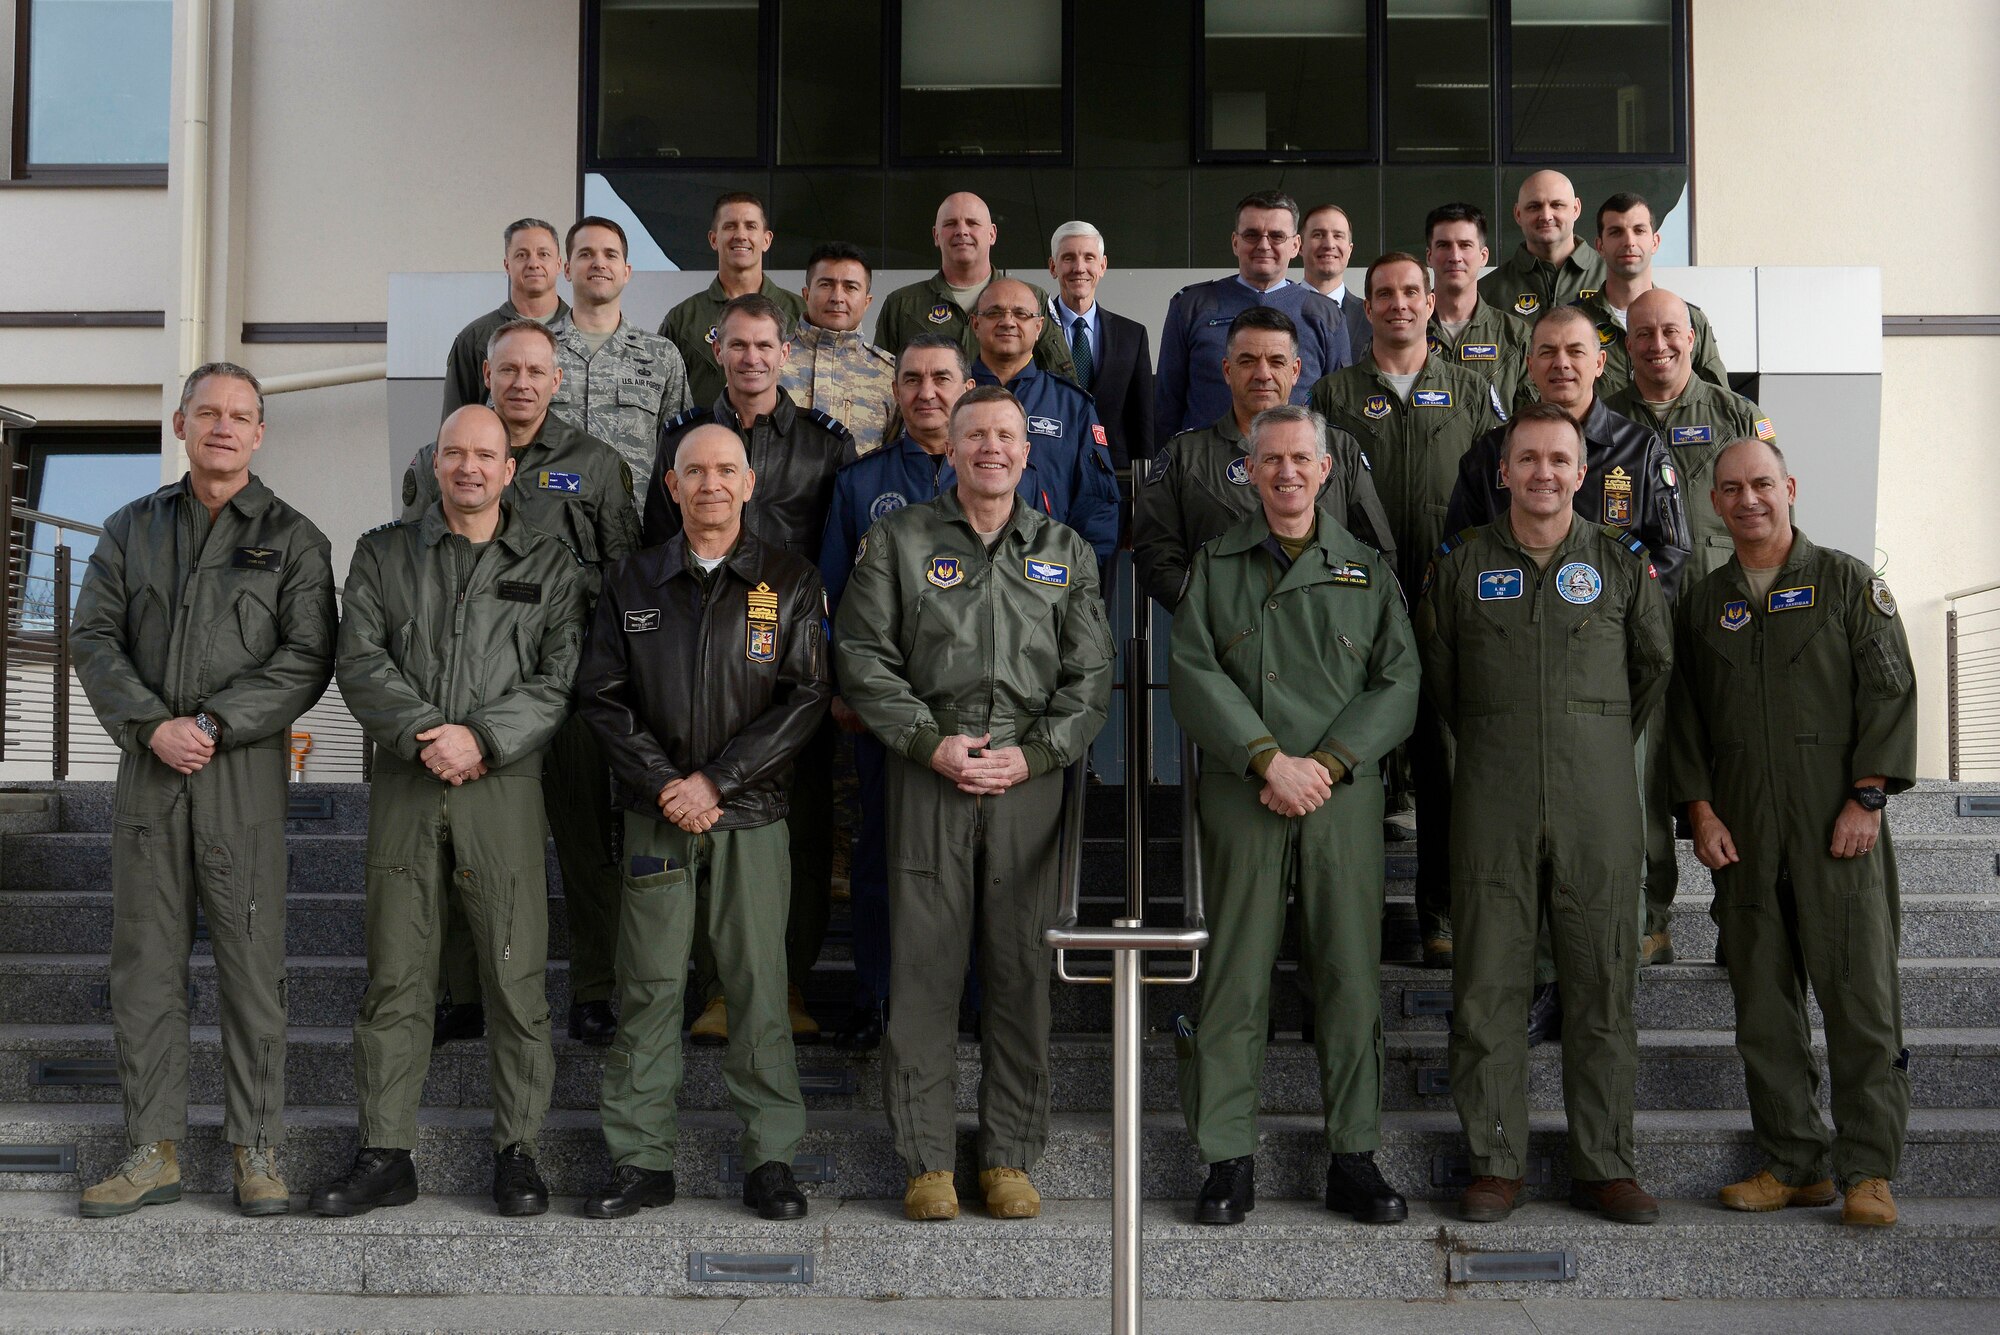 Military leaders from several European countries join U.S. Air Forces in Europe 5th Generation Integration Division for an F-35 Air Chief meeting on Ramstein Air Base, Germany, Feb. 12, 2019. U.S. Air Force Gen. Tod D. Wolters, USAFE commander, hosted a meeting that brought nine nations together and focused on how the European User's Group for the F-35A Lightning II would work together.